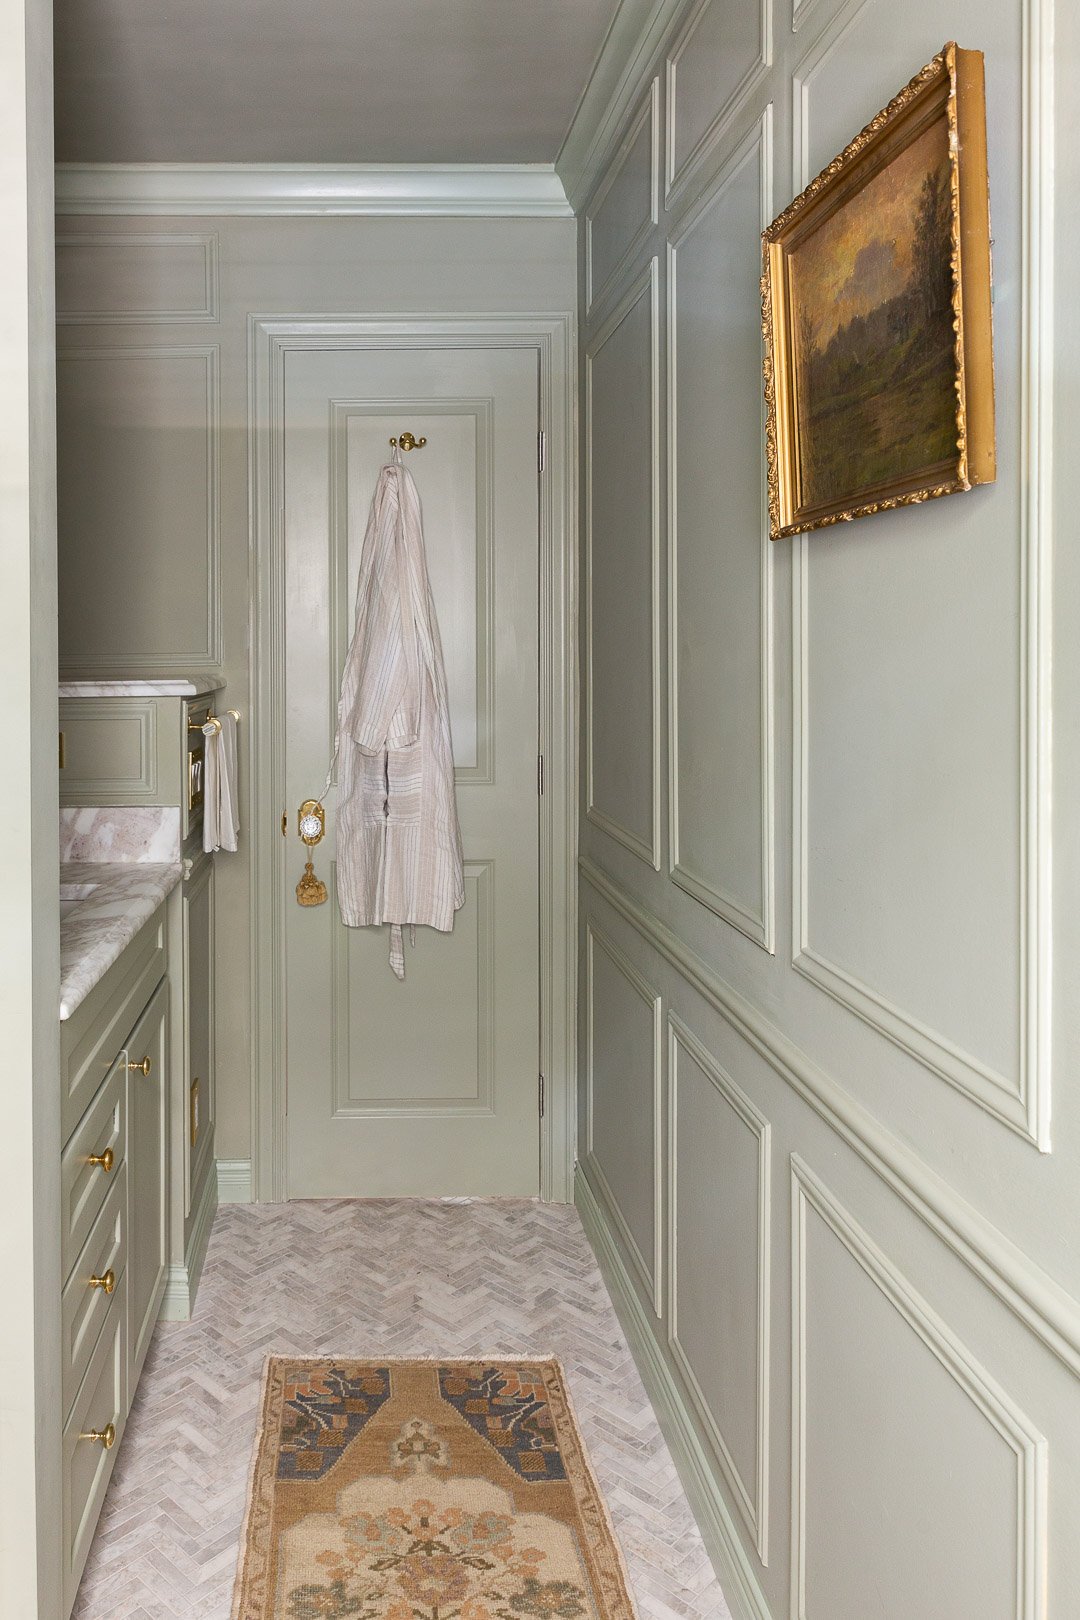 'Decorative moulding can transform a space entirely. The detail adds something special and can make a room exude elegance. Explore all of our moulding profiles on the website.
-
📷 @aglassofbovino
-
#OrnamentalBuild #LoveTheRoom #InteriorDesign #Deco